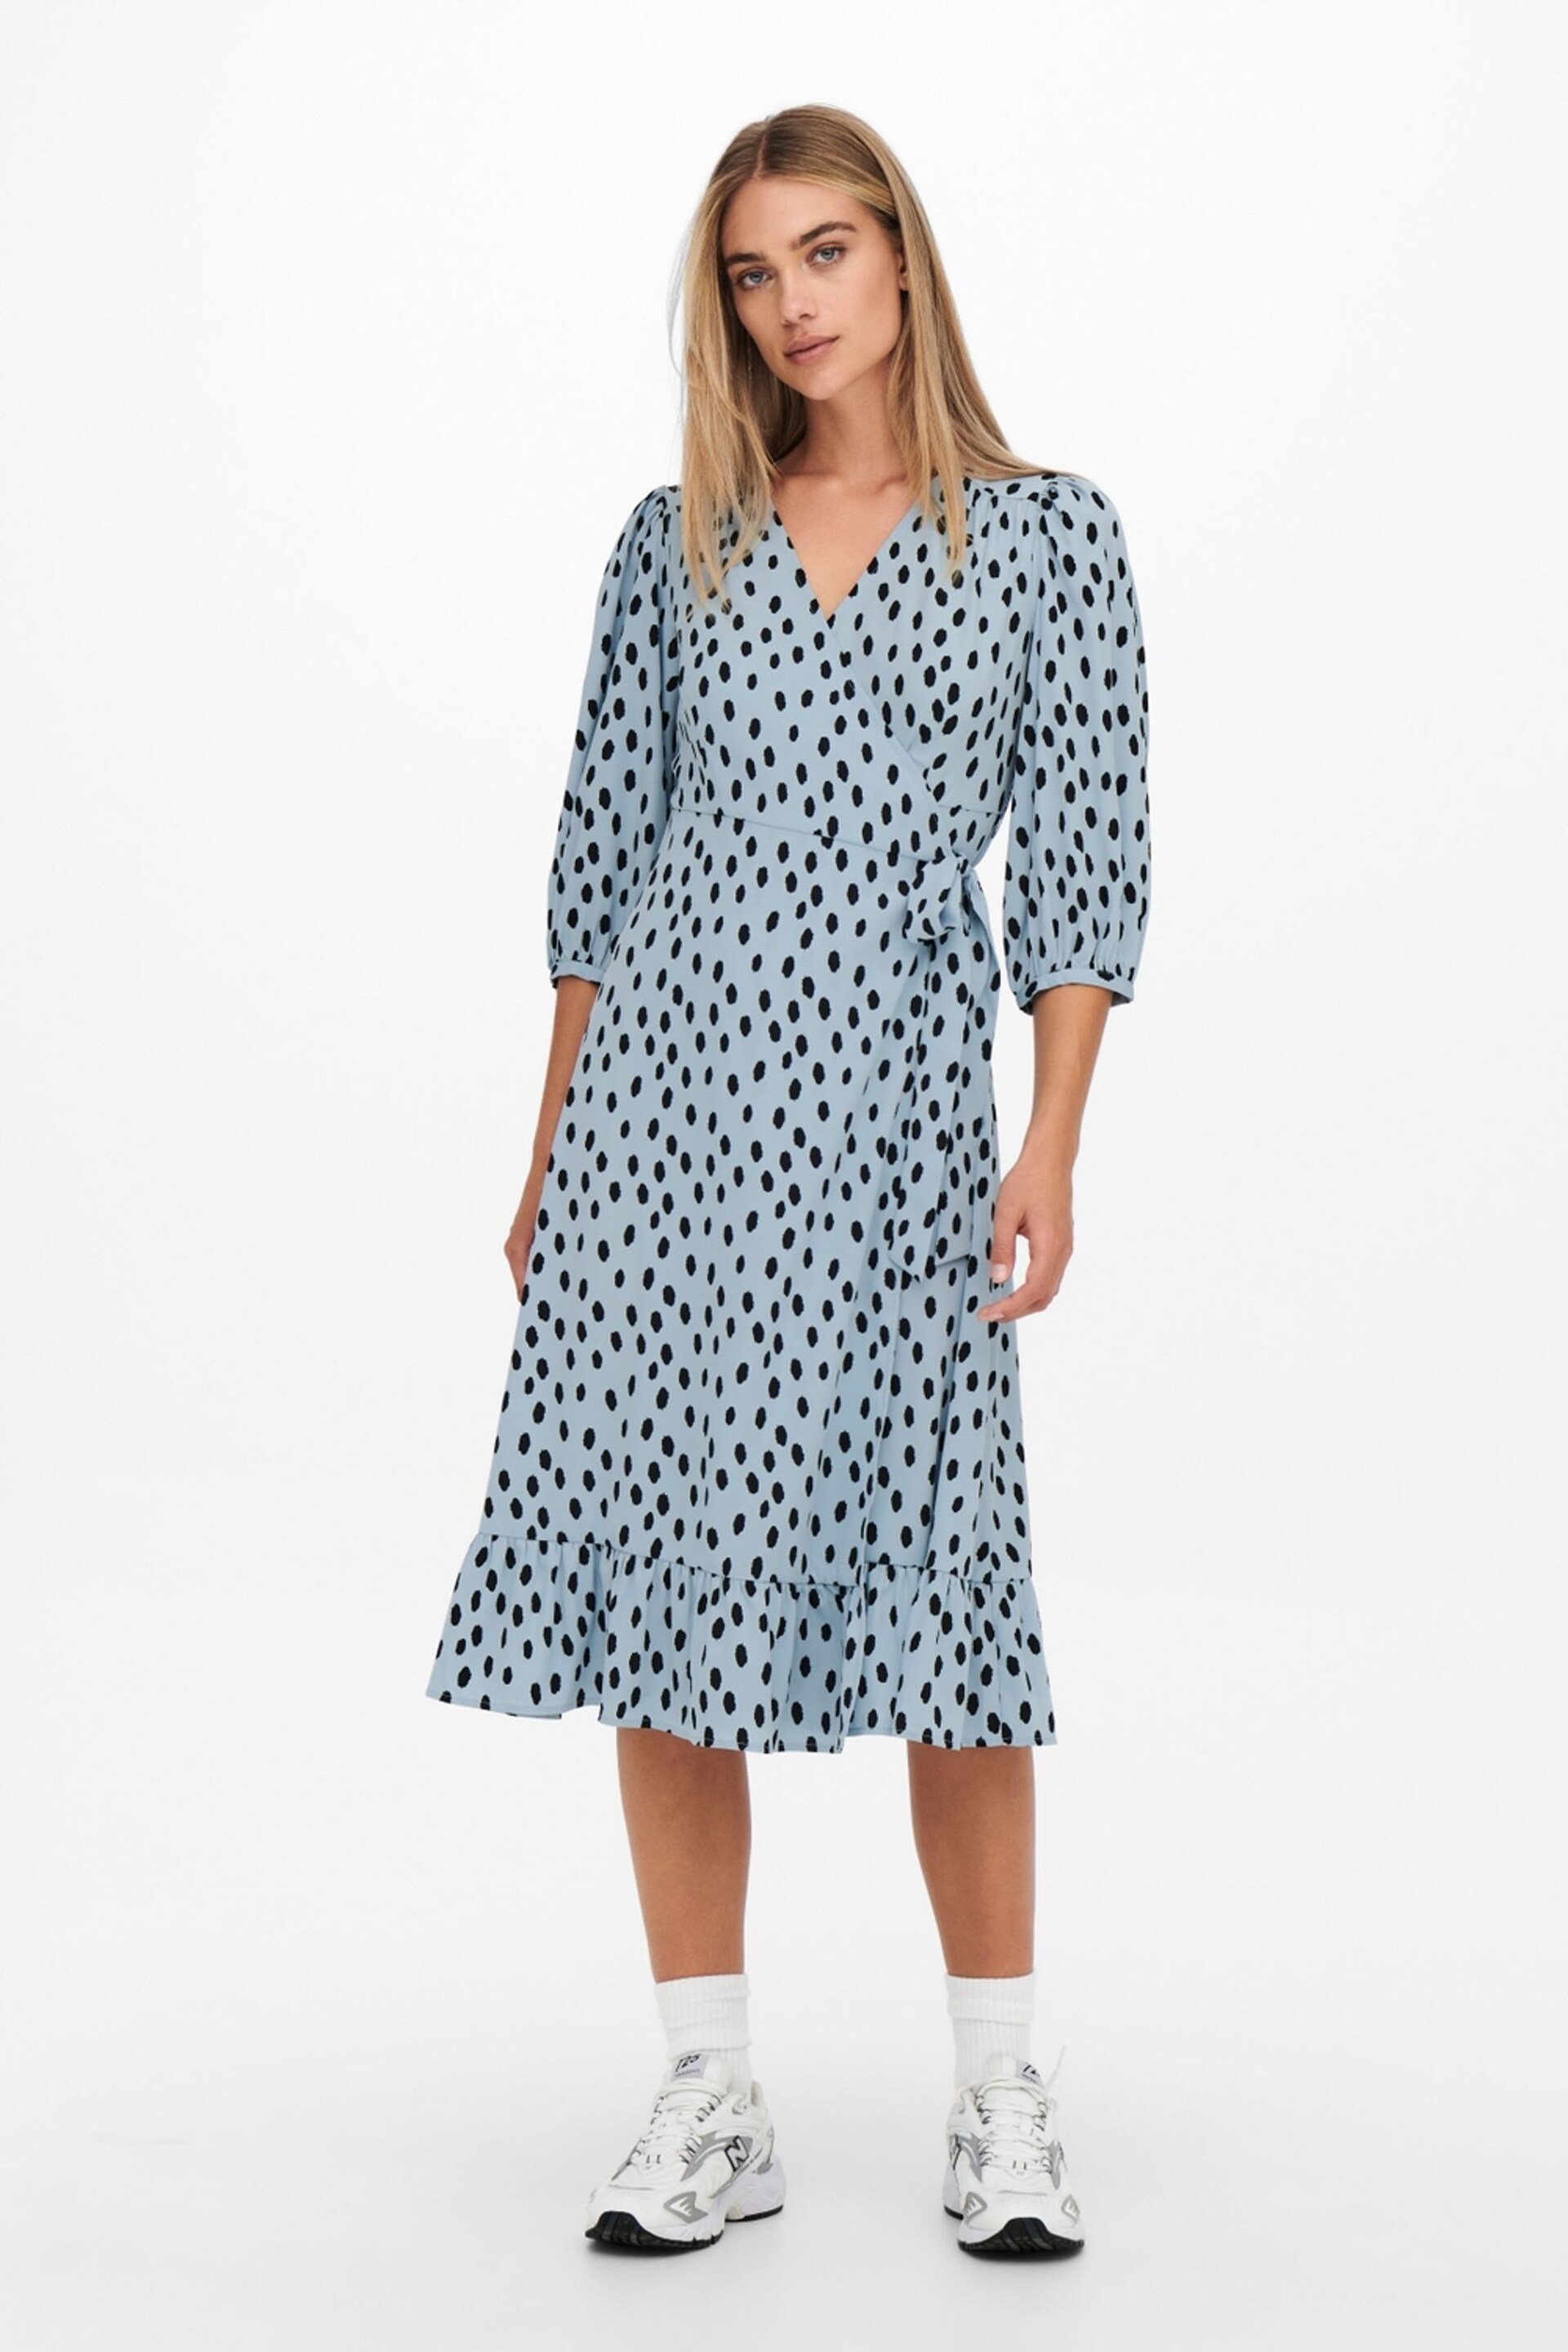 ONLY Blue Long Sleeve Wrap Midi Dress - Image 1 of 1